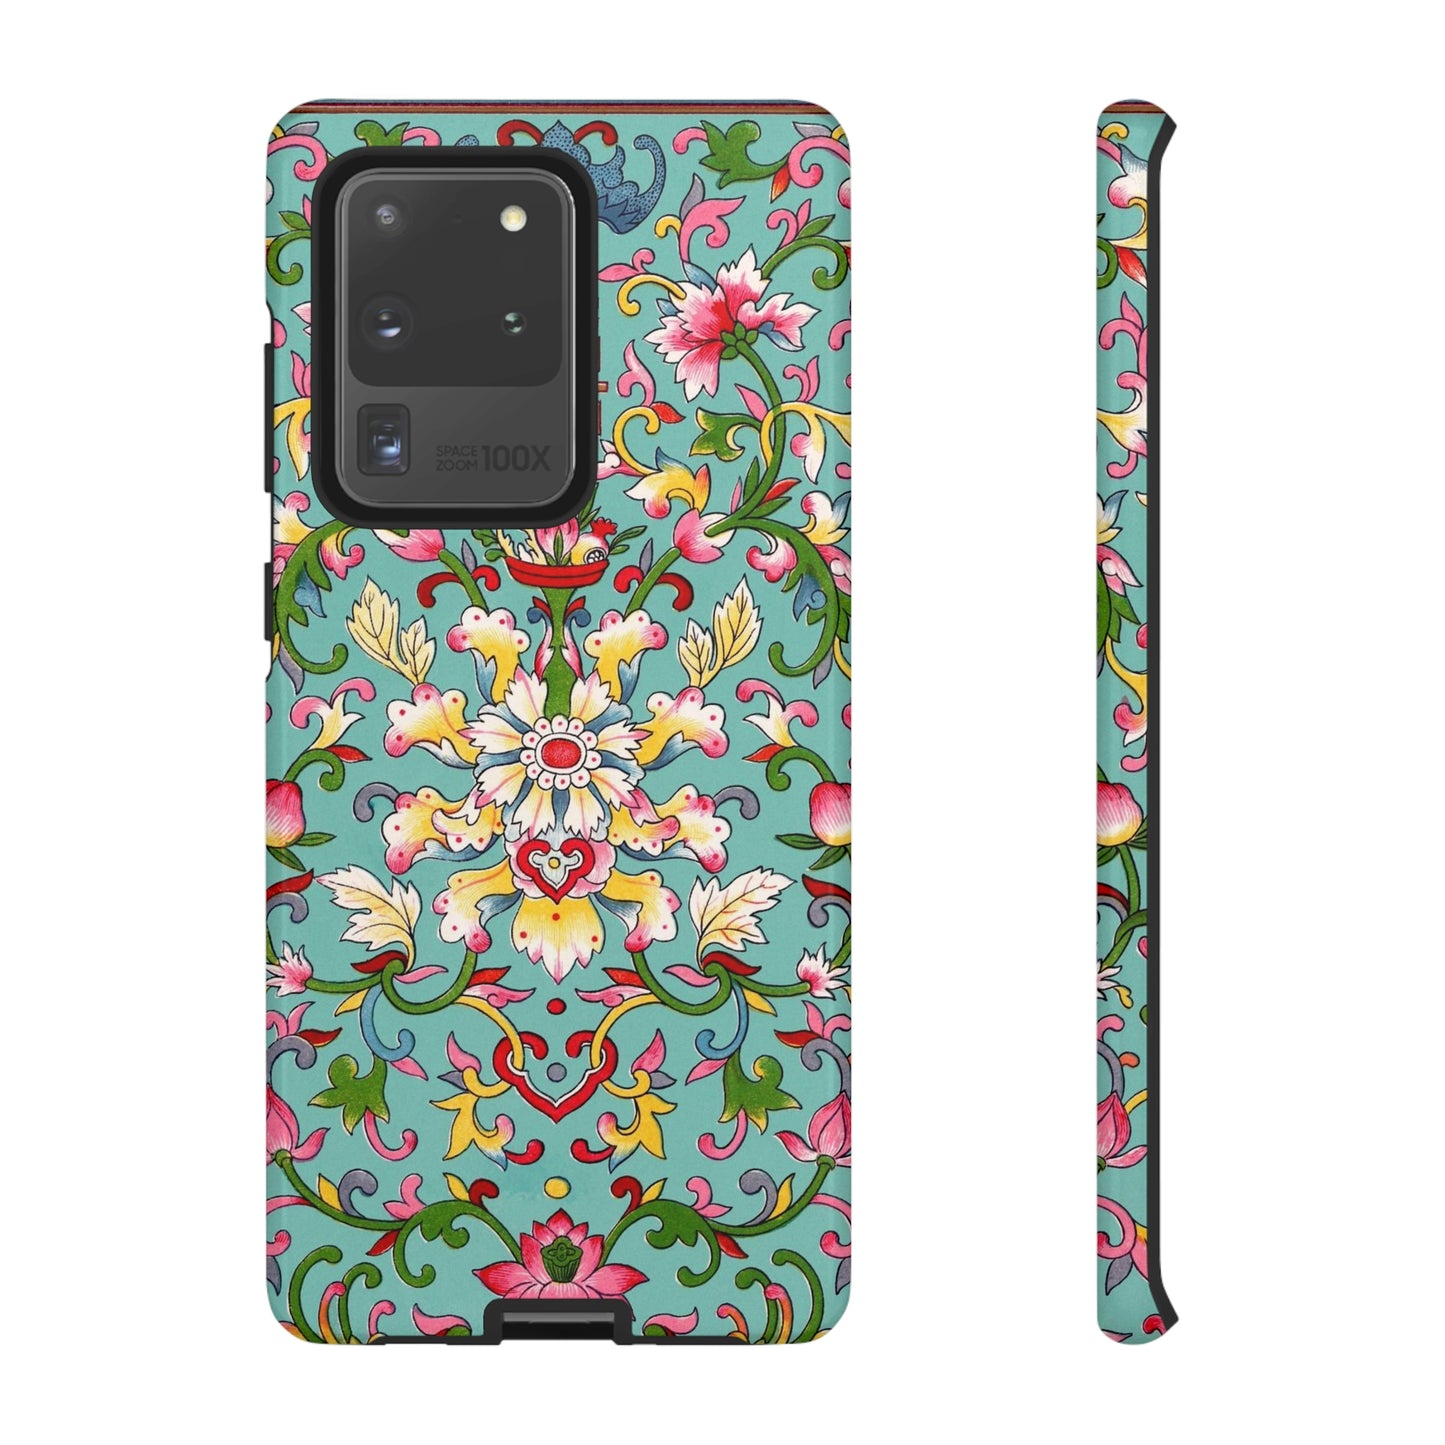 Floral Family Phone Case - BRYKNOLO LLC Phone Case Samsung Galaxy S20 Ultra / Glossy